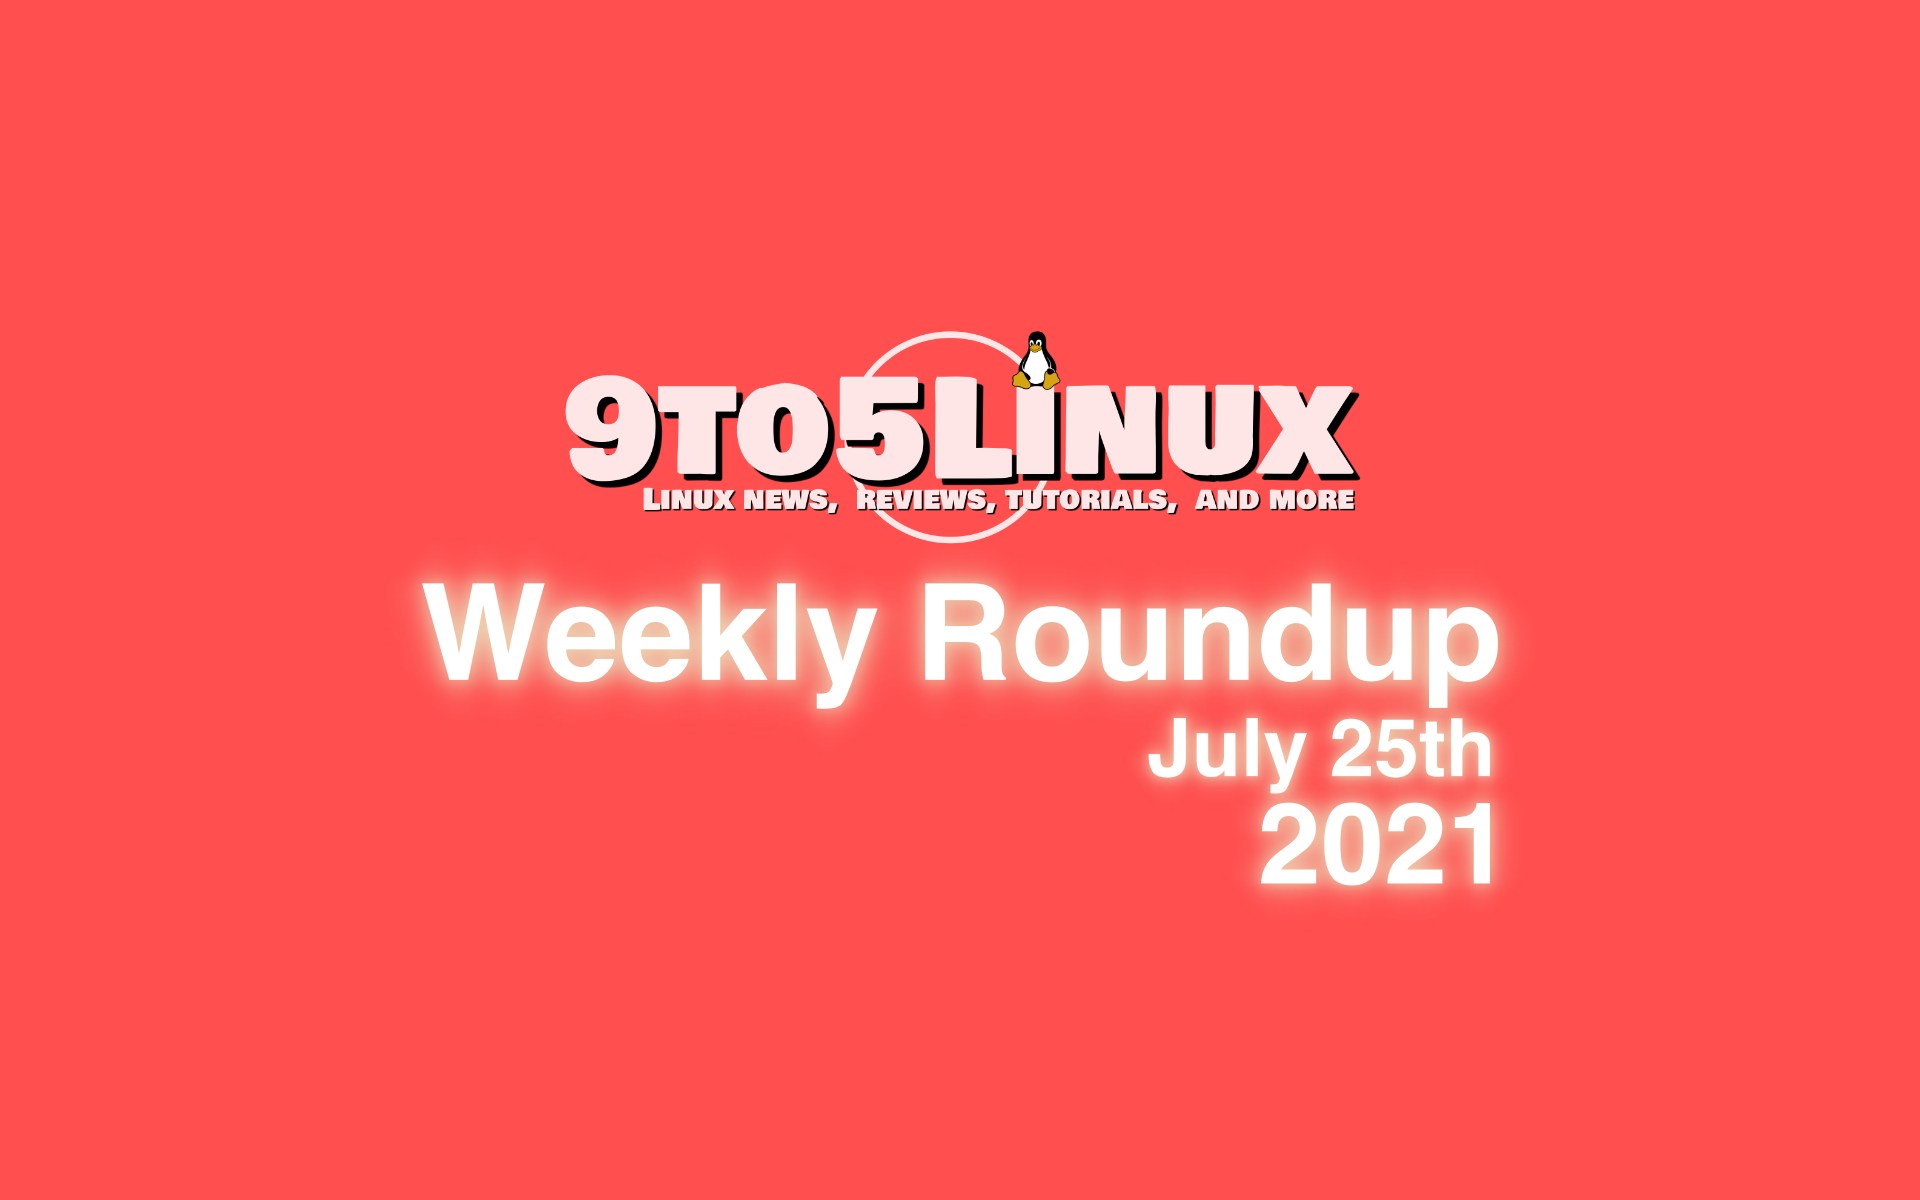 9to5Linux Weekly Roundup: July 25th, 2021